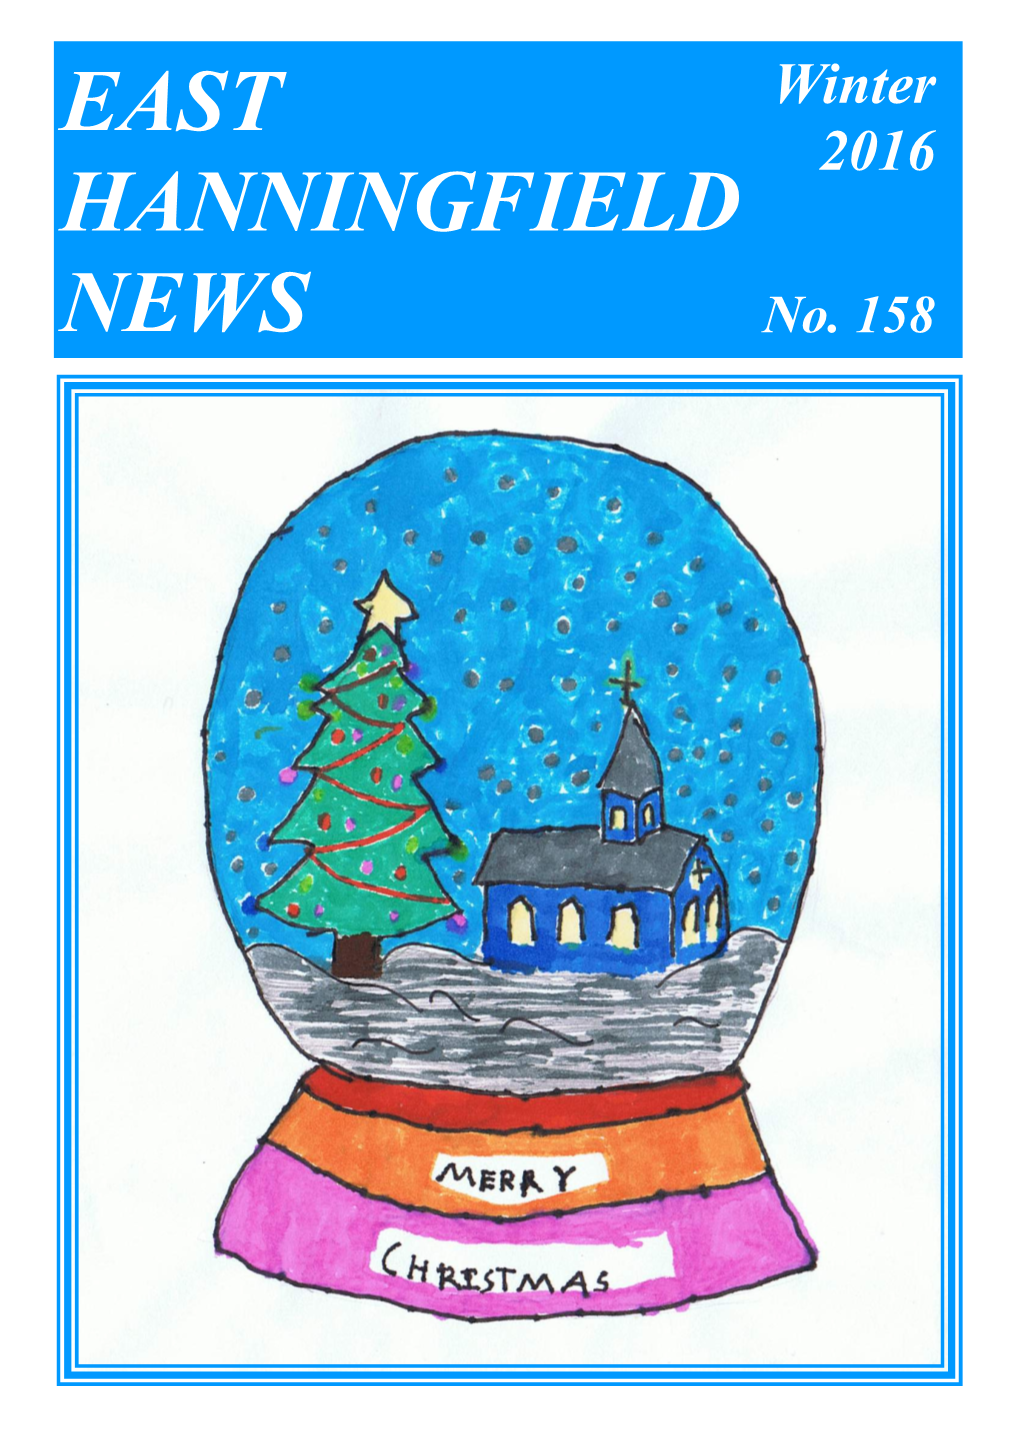 East Hanningfield News Is Published by East Hanningfield Parish Council and Delivered by Volunteers to All Homes and Many of Busi- Nesses in the Parish